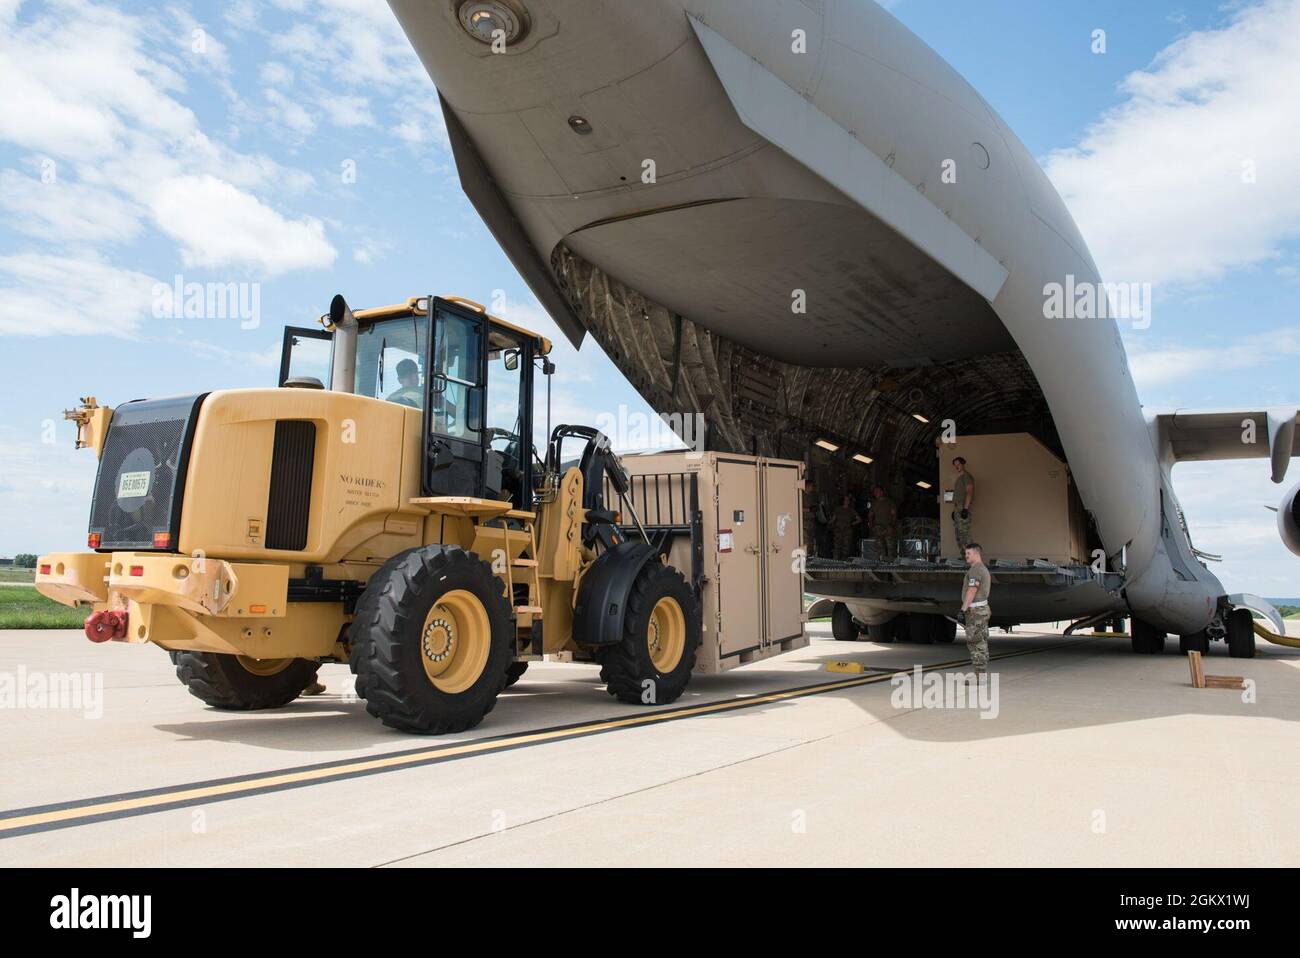 U.S. Air Force Senior Airman Alec Moser, an aerial transportation specialist with the 123rd Airlift Wing, Kentucky National Guard, uses a forklift to load contained cargo into a C-17 Globemaster III aicraft during a cargo loading exercise at the 167th Airlift Wing, Martinsburg, West Virginia, Jul. 14, 2021. The 167th hosted members from the 123rd for a small air terminal training in preparation for their upcoming deployment. Stock Photo